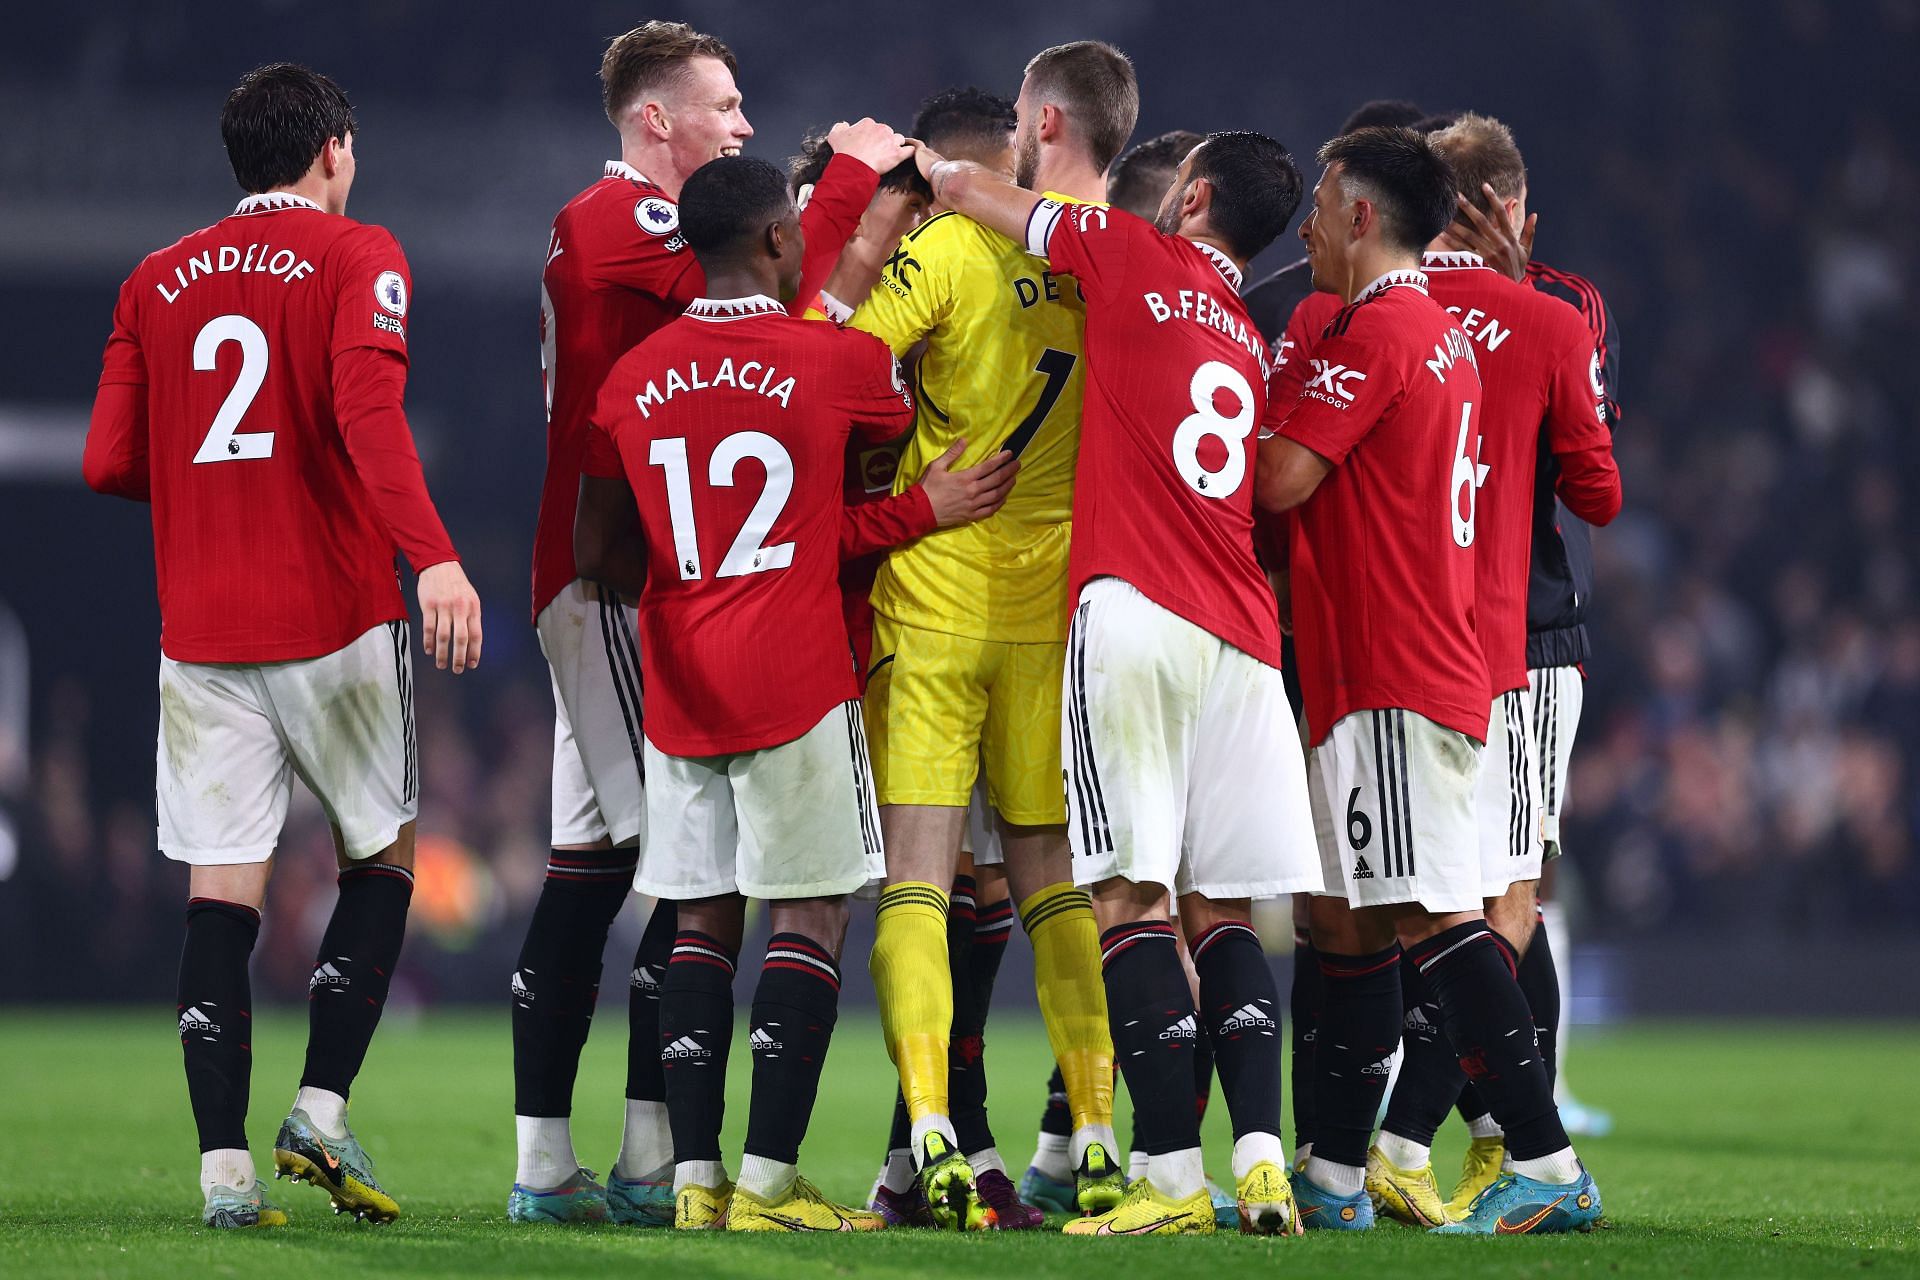 The Red Devils continue their top-four push